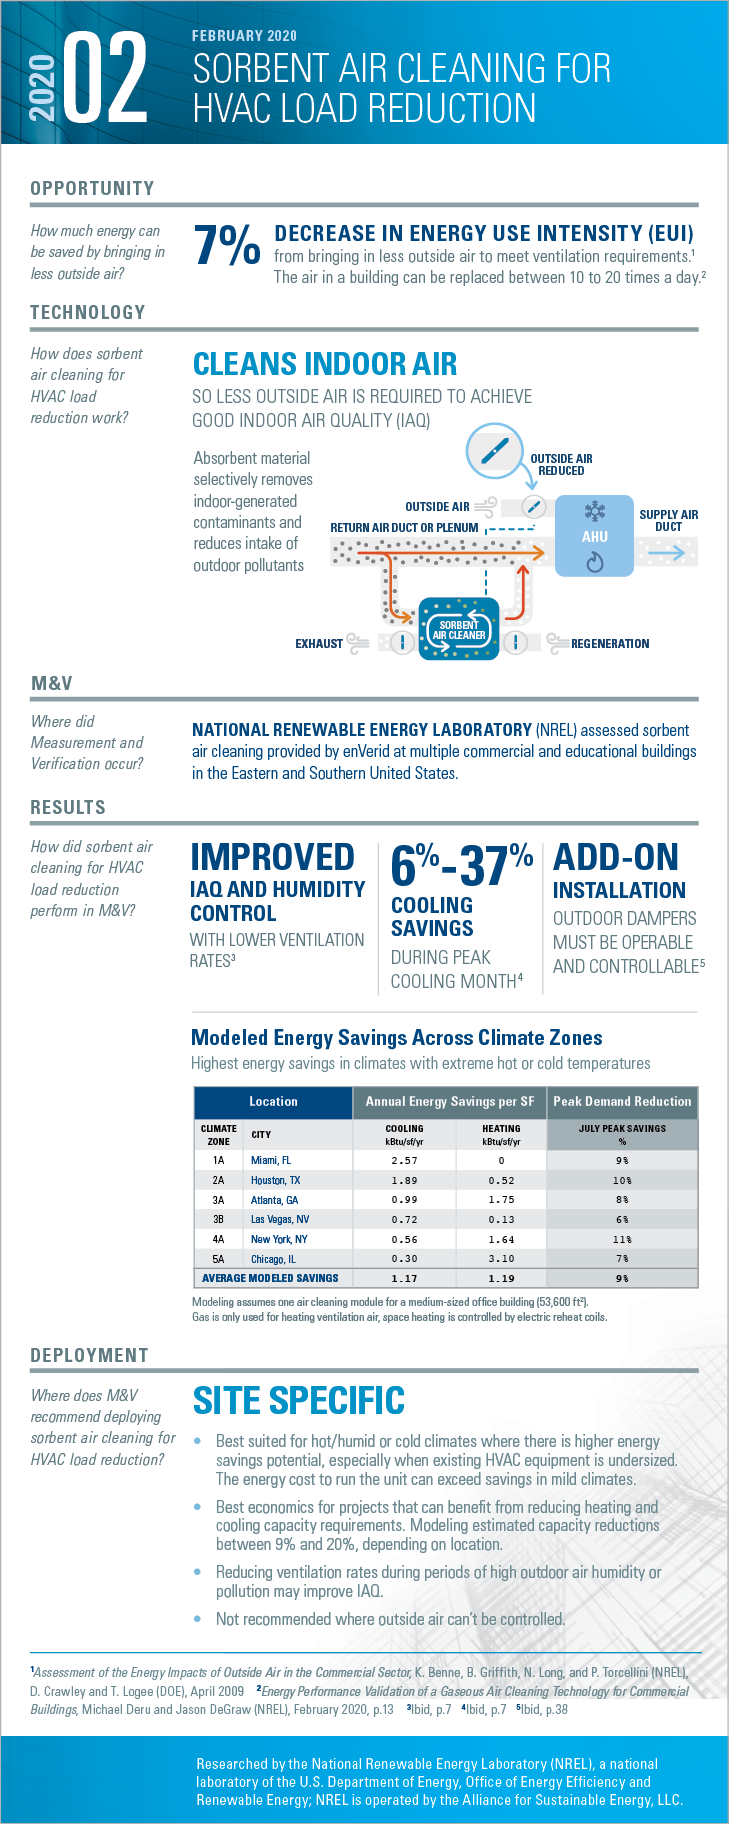 Download the PDF of the full-size infographic for DOE 2020-02 Sorbent Air Cleaning.